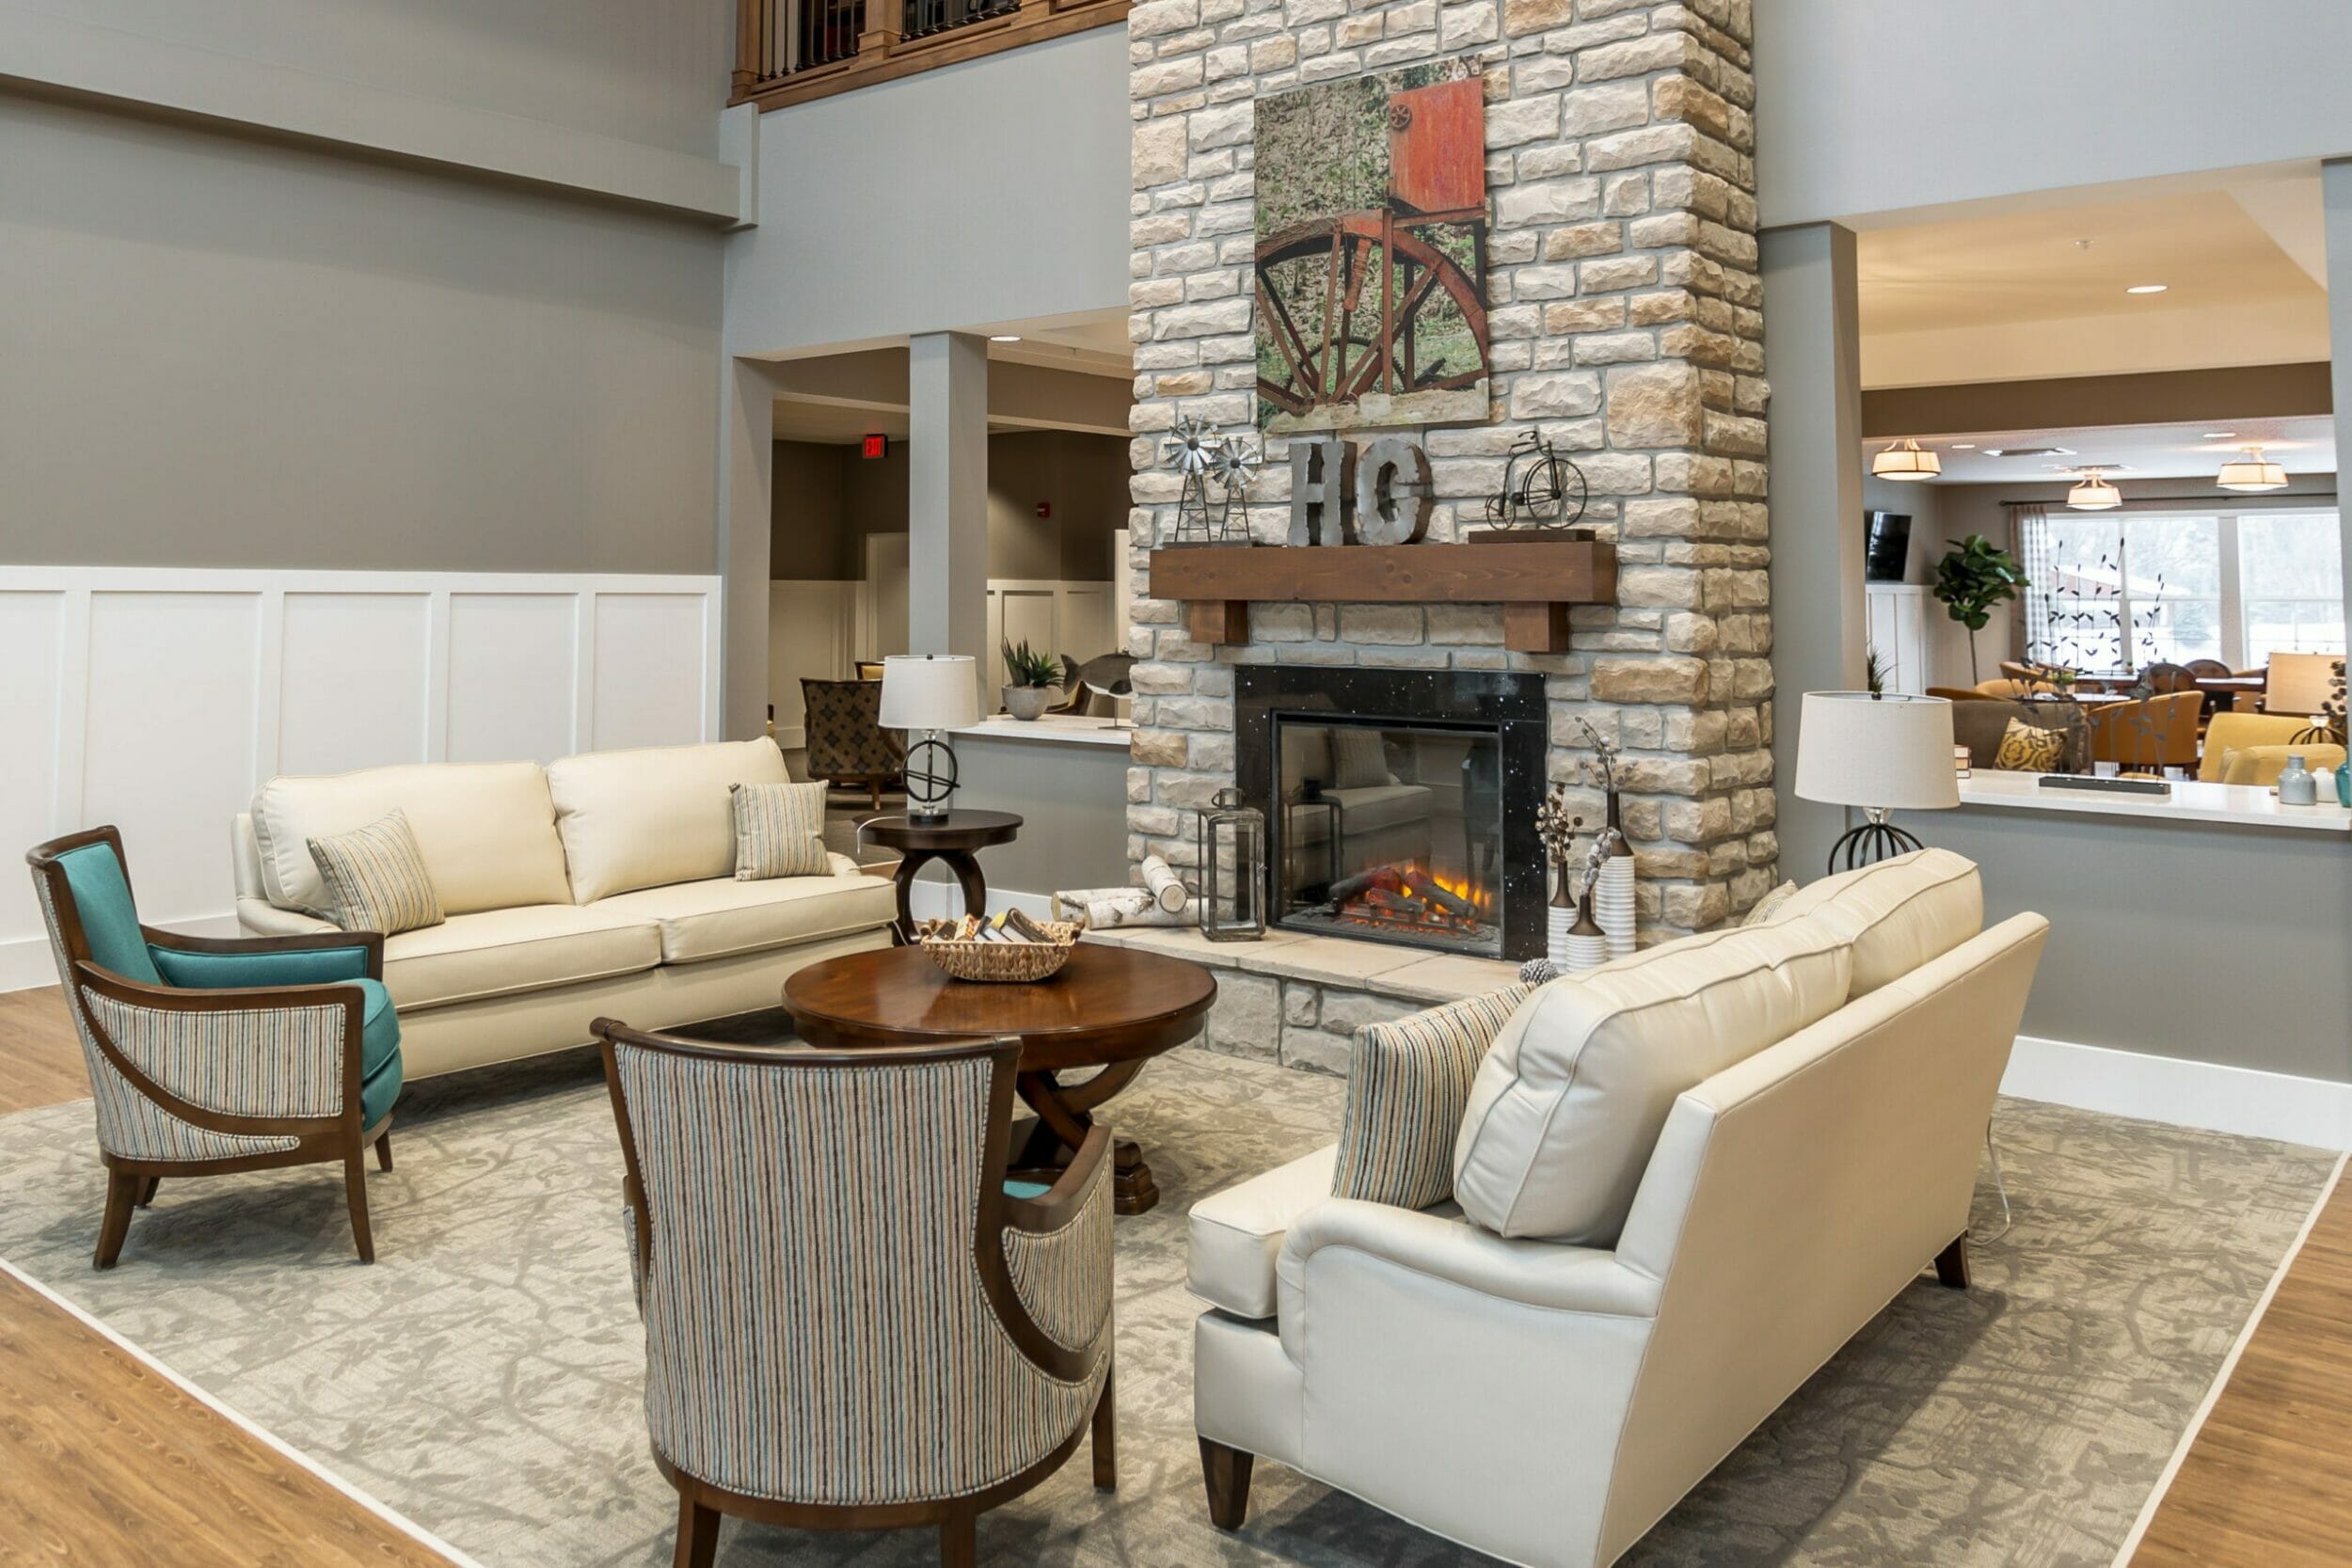 two-story duo stone fireplace in living room area couches and chairs around the fire